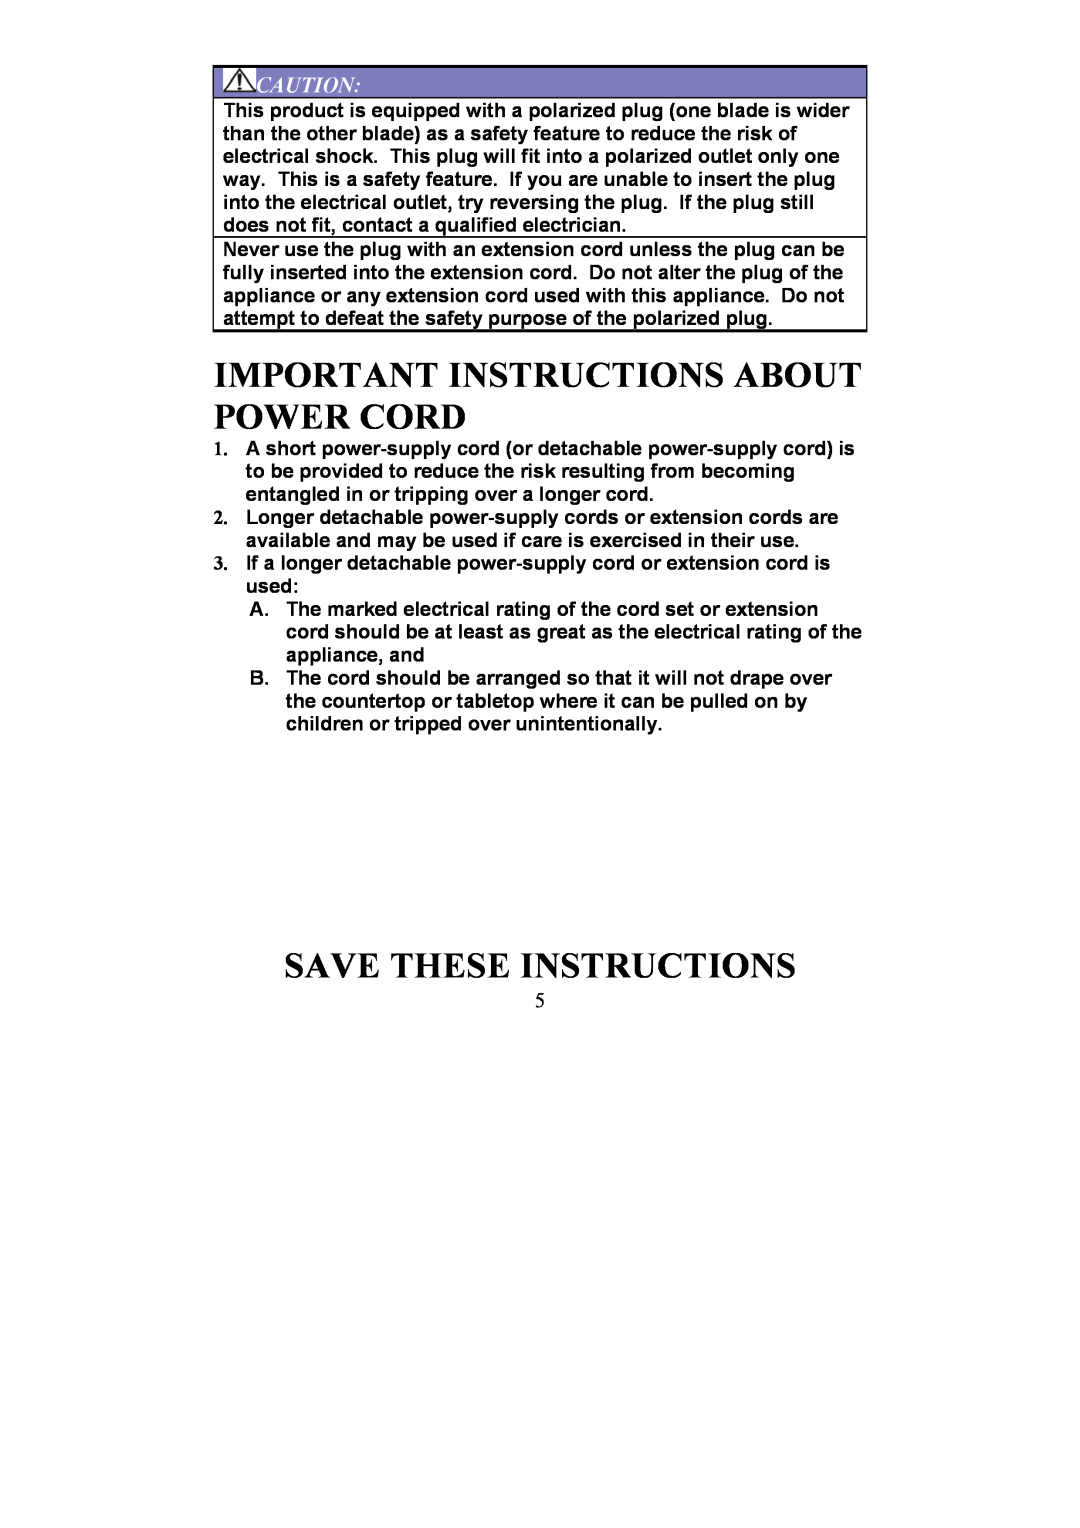 Magic Chef EWCM11TS12 operating instructions Important Instructions About Power Cord, Save These Instructions 